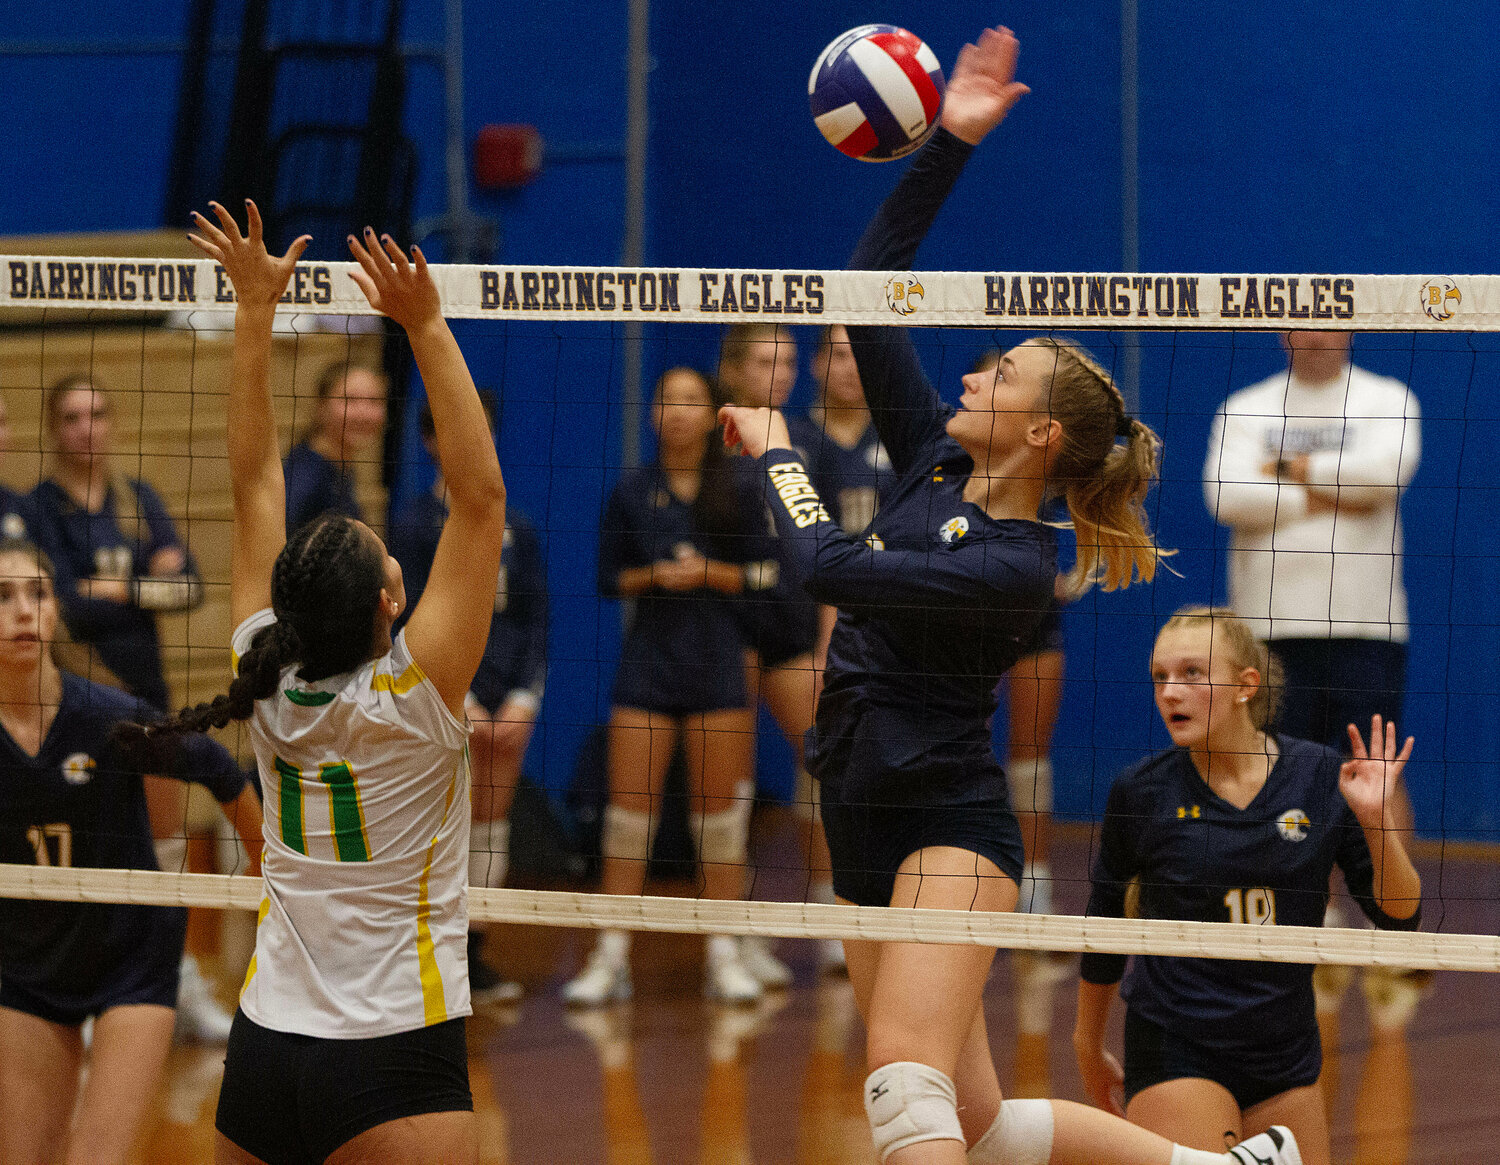 Ruby Ciummo elevates to spike the ball over the net with Ava Hentz (left) and Sophia Denham looking on.